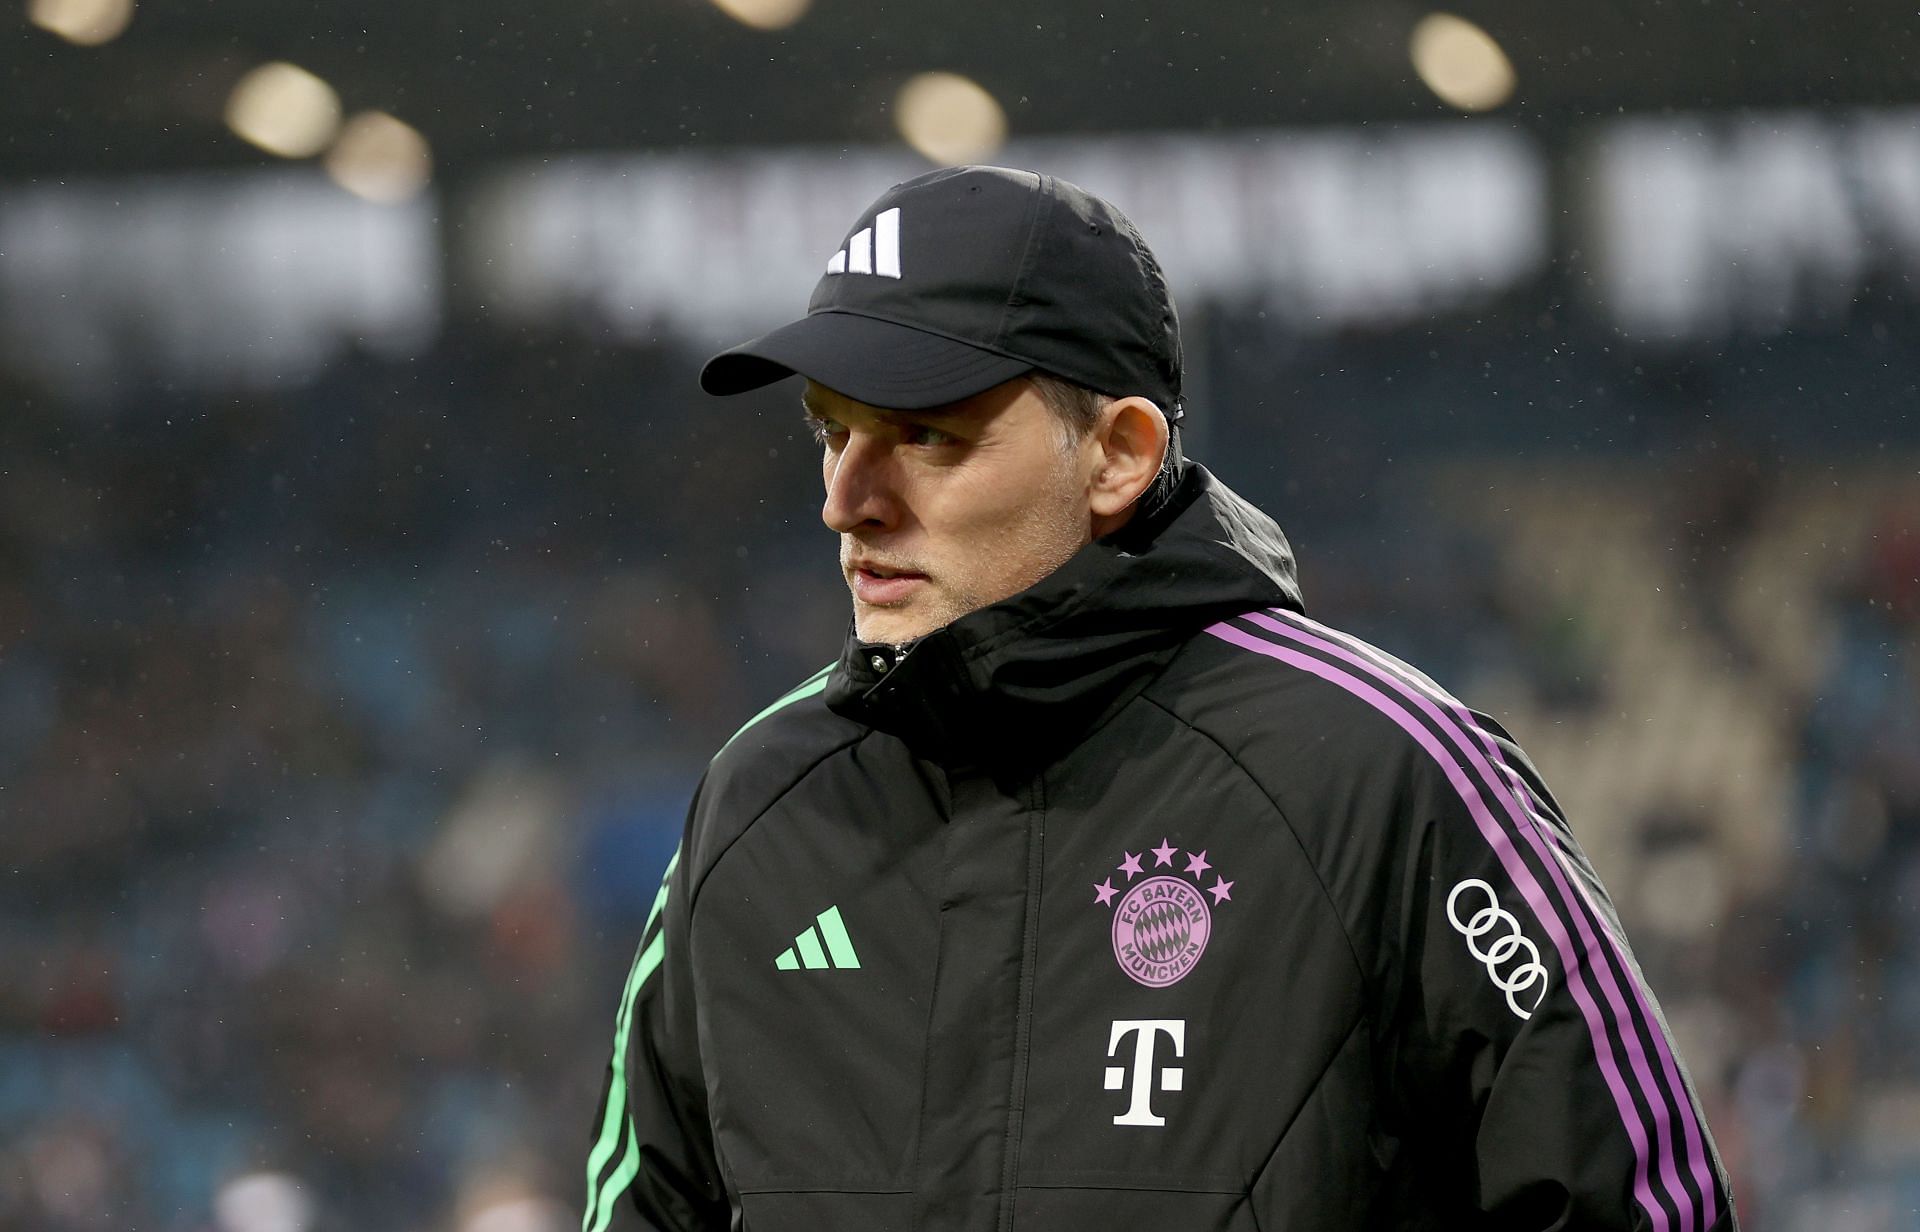 Thomas Tuchel could be an option to replace Xavi.